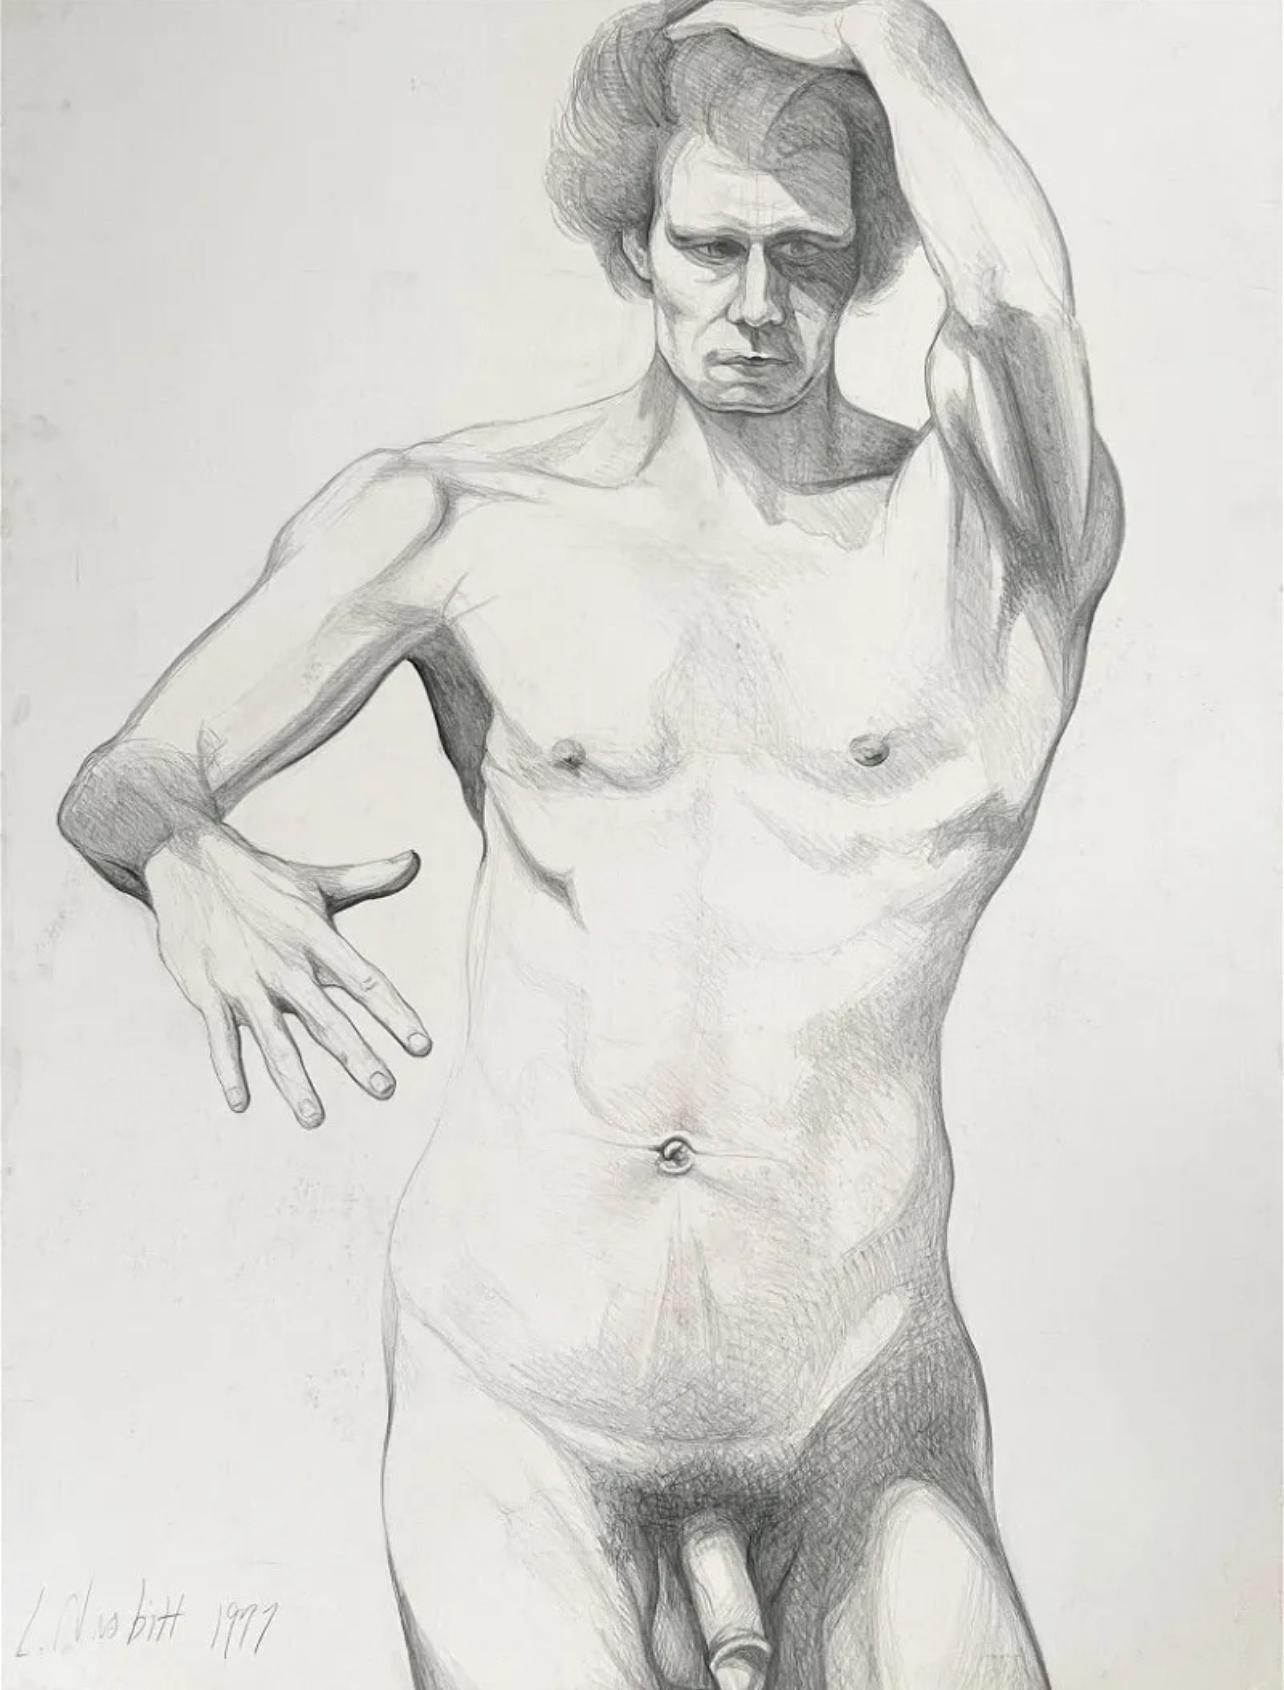 Artist: Lowell Nesbitt (1933-1993)
Title: (Male Nude) Untitled, 1977
Year: 1977
Medium: Graphite on Artist's Board
Size: 52.5 x 40 inches
Condition: Excellent
Inscription: Signed & dated in pencil

LOWELL NESBITT (1933-1993) One of the most